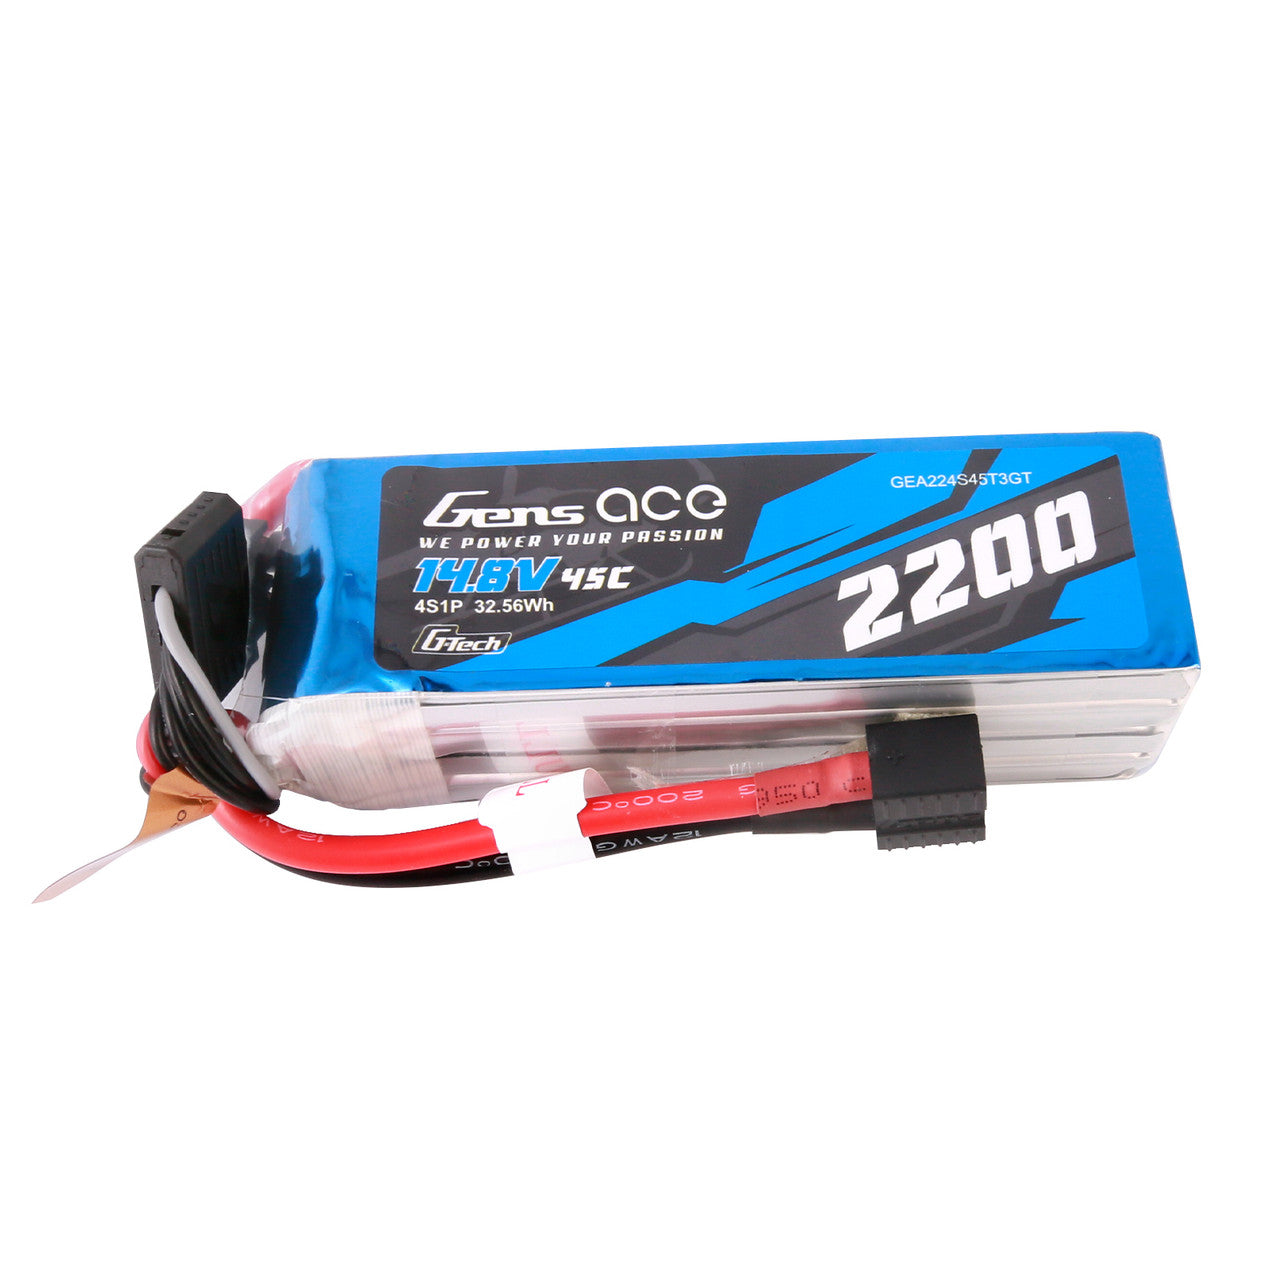 GEA224S45T3GT Gens Ace G-Tech 2200mAh 45C 14.8V 4S1P Lipo Battery Pack With EC3 And Deans Adapter